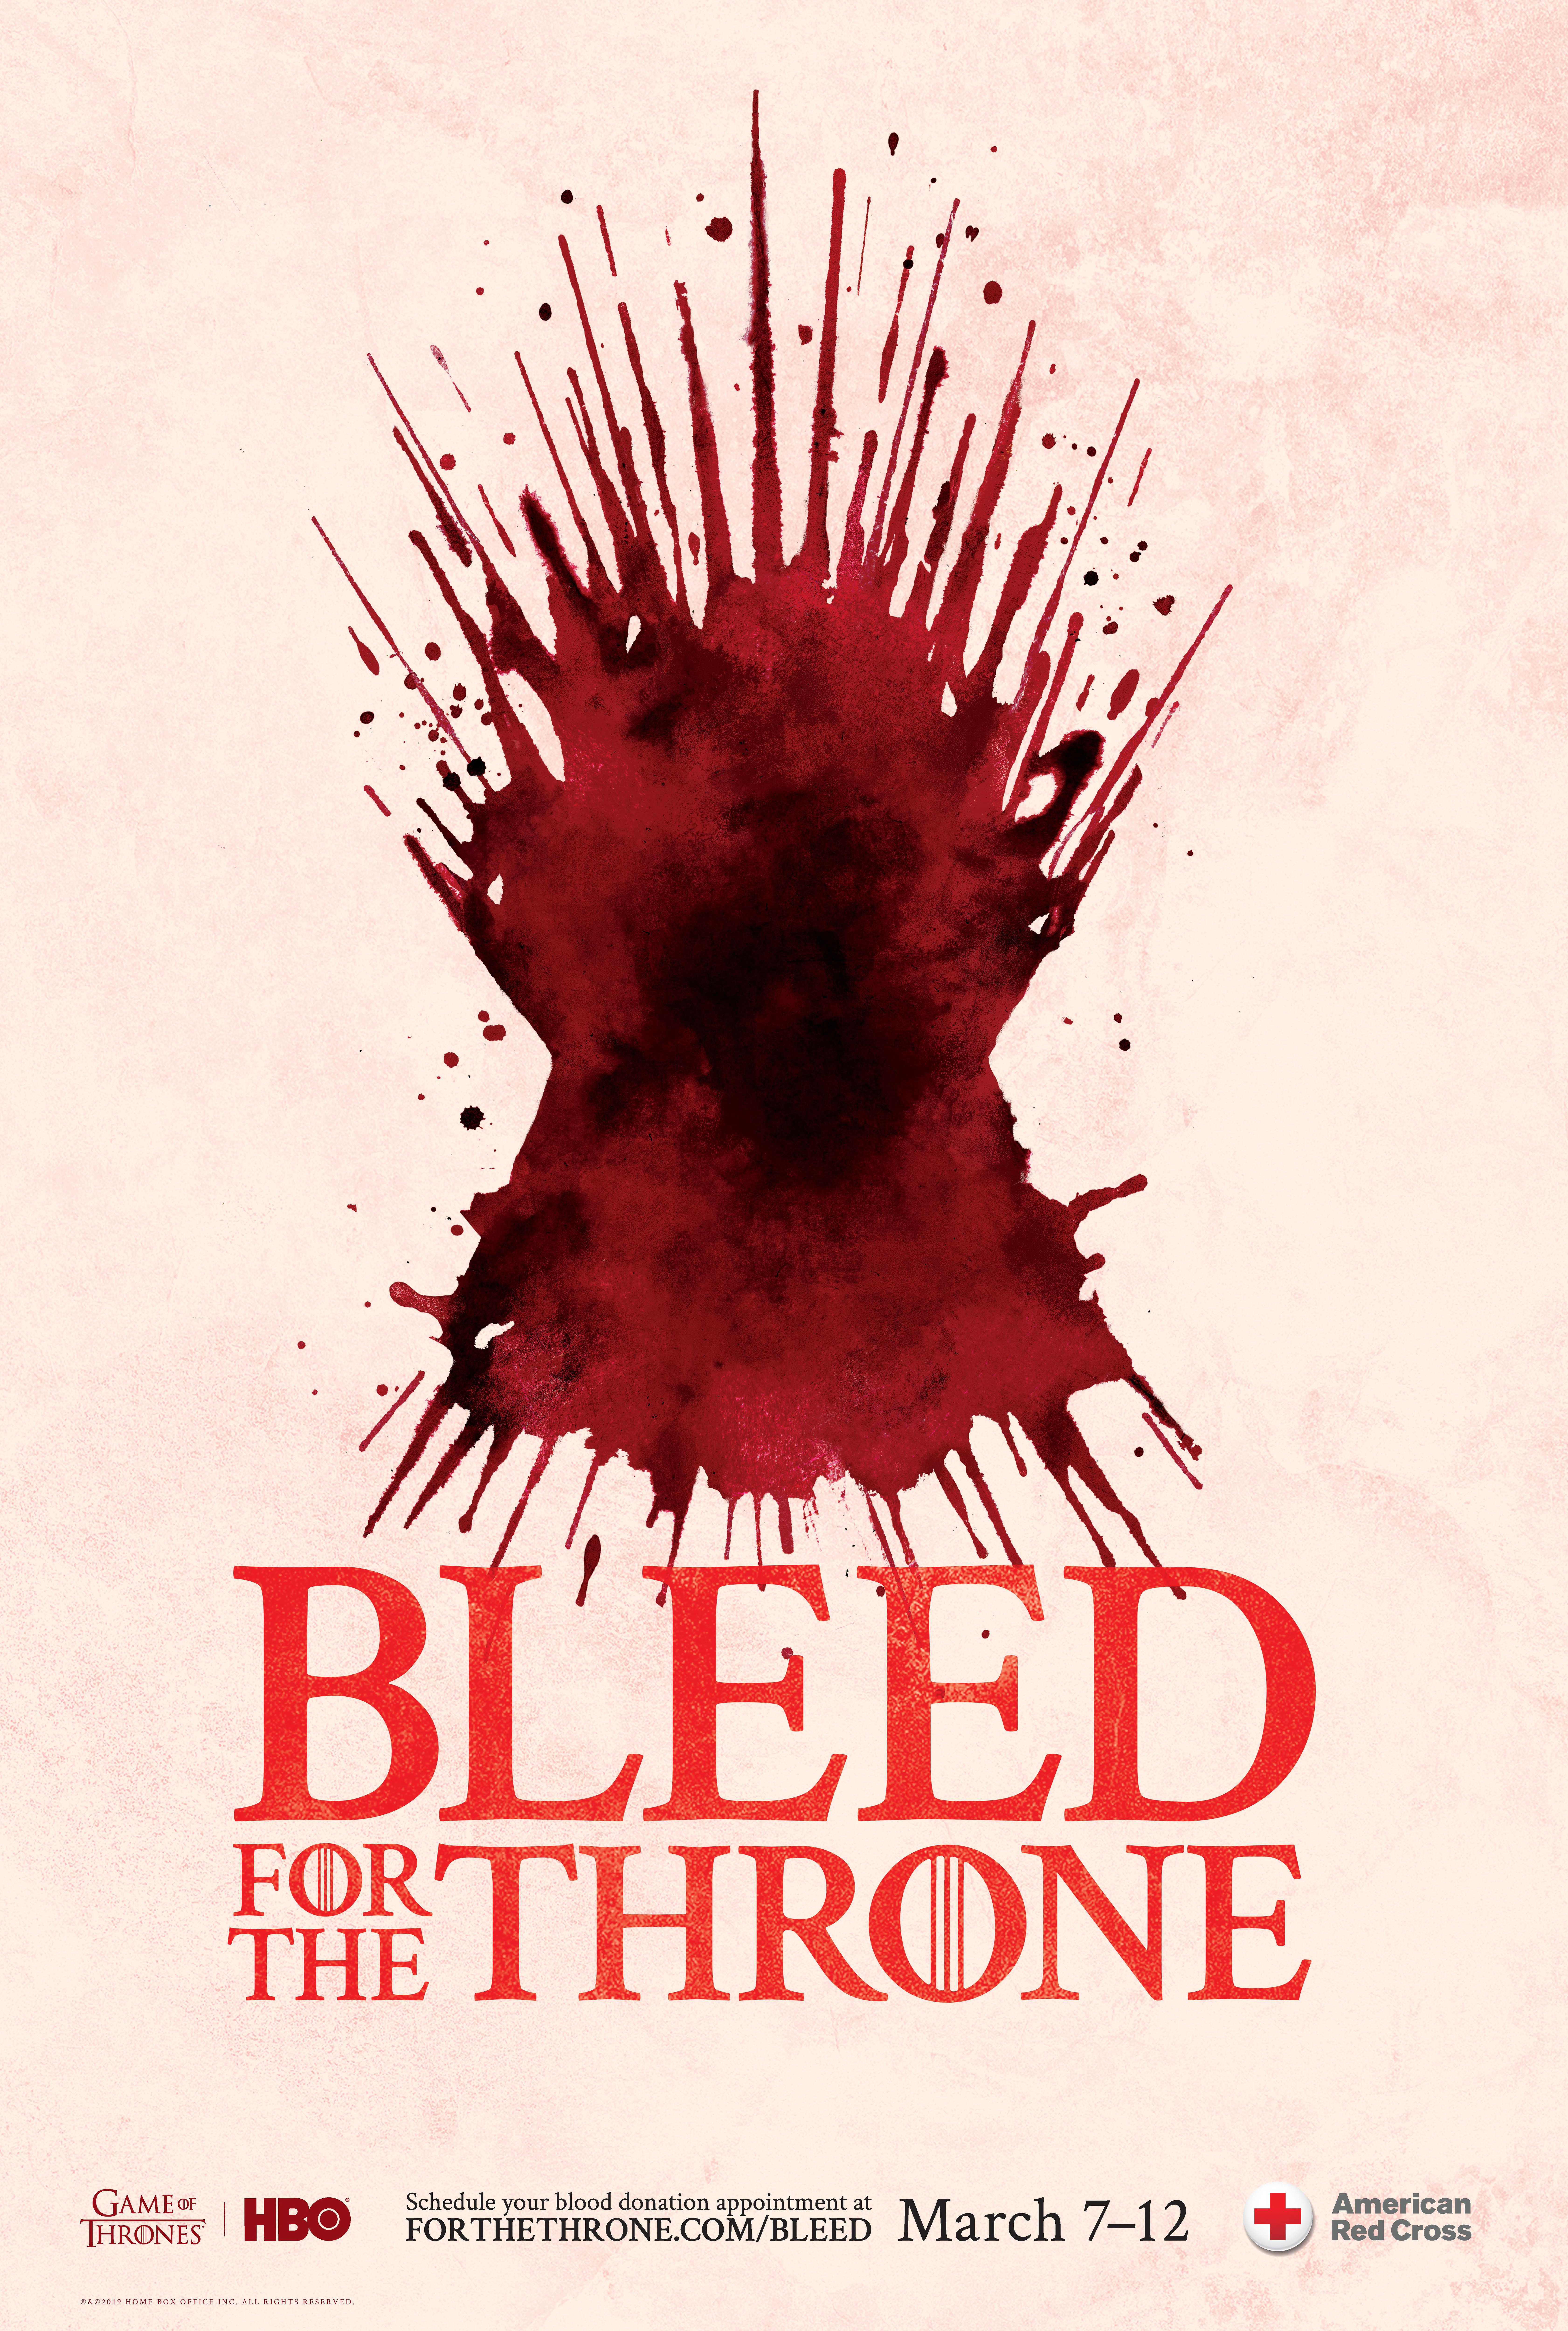 Hbo Invites Game Of Thrones Fans To Bleed For The Throne In